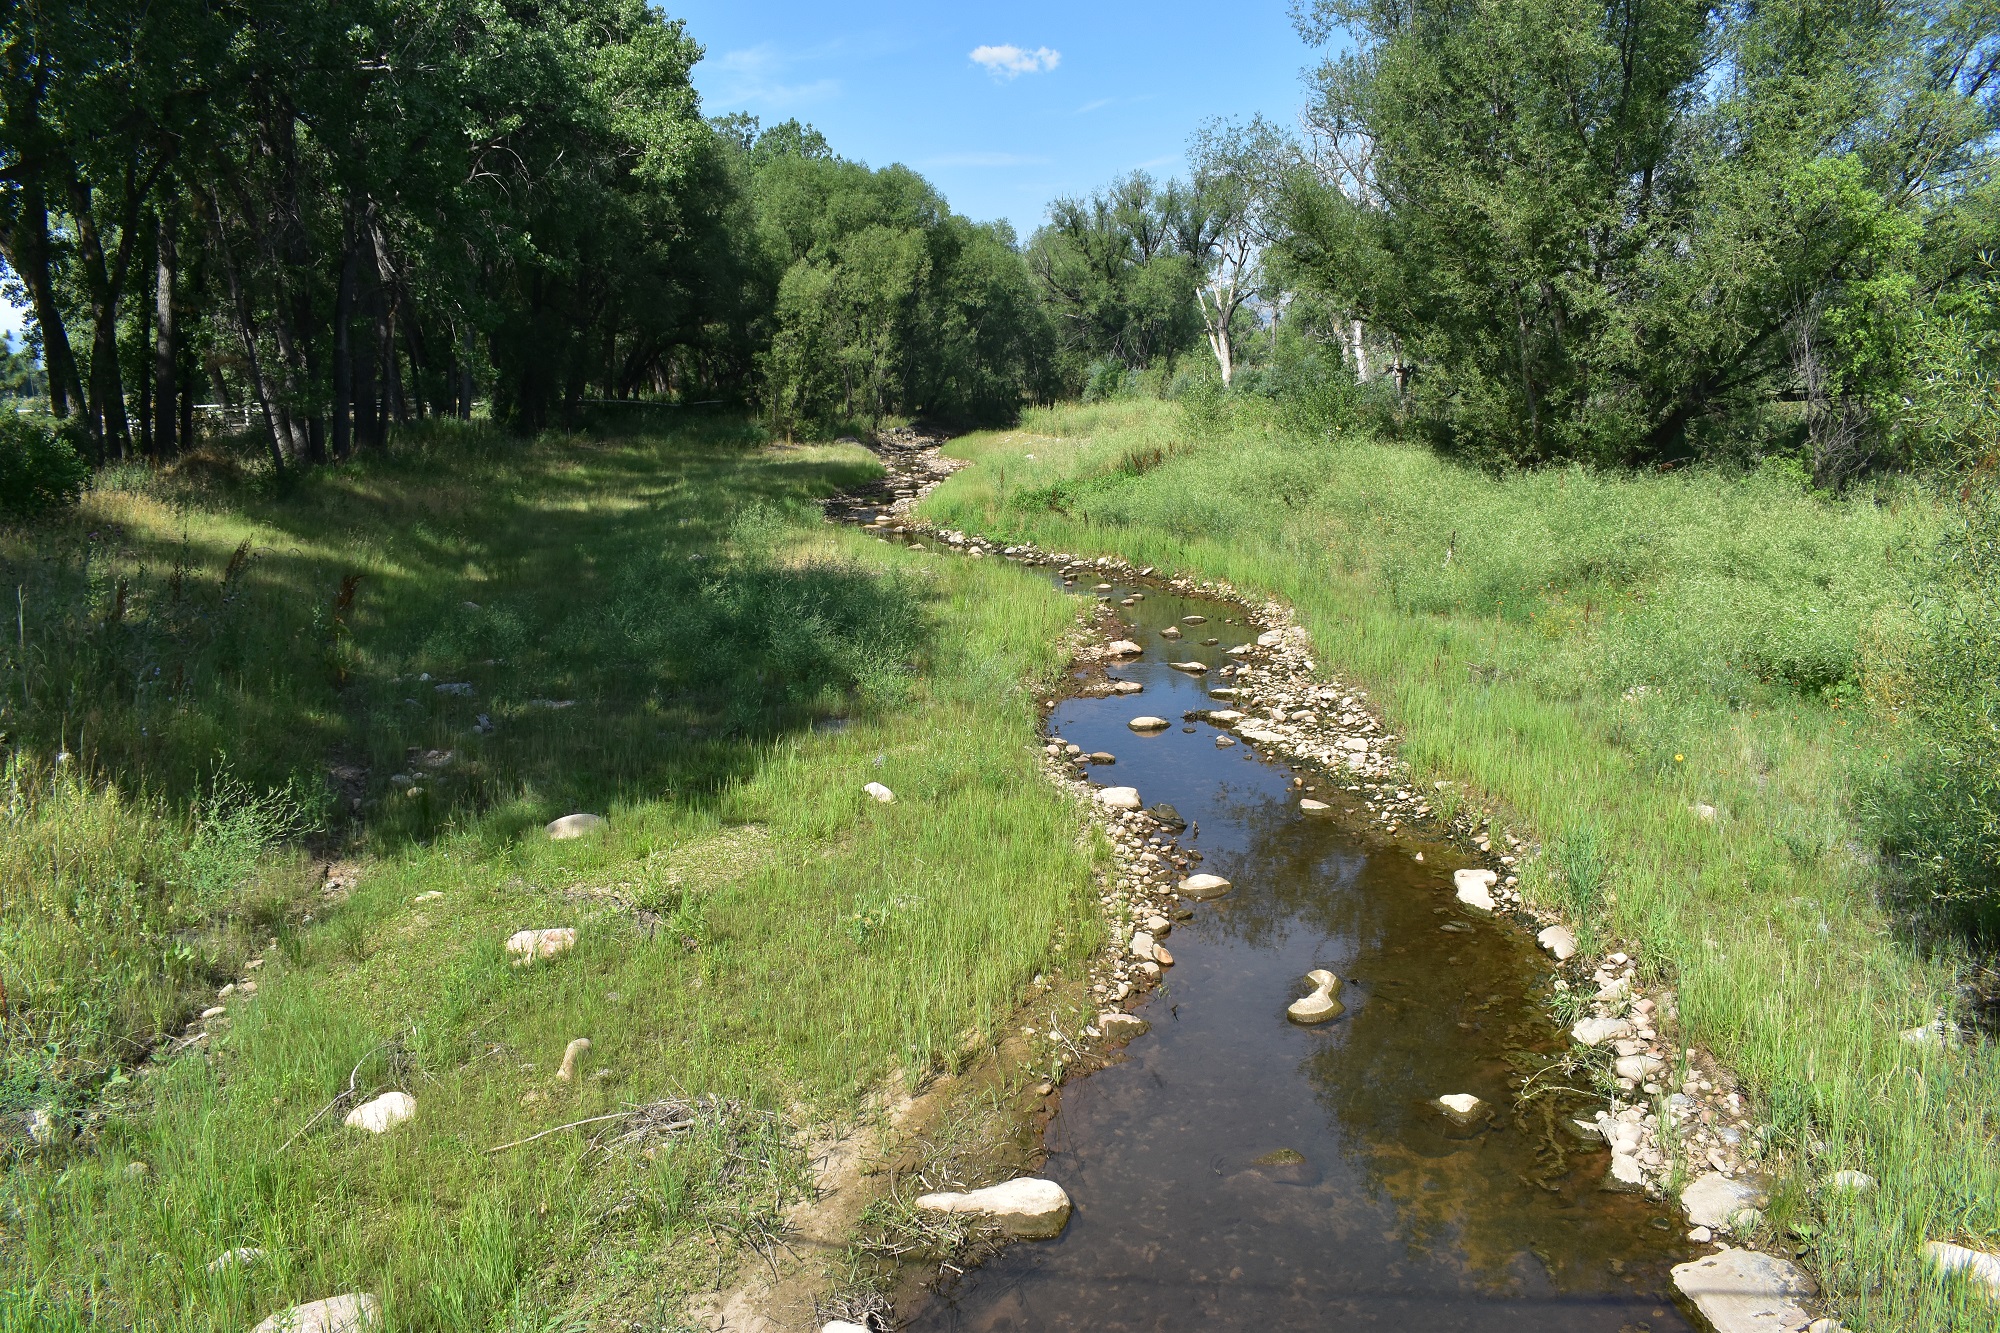 Restoration of a creek at Year 1, which includes shoreline stabilization features and grasses